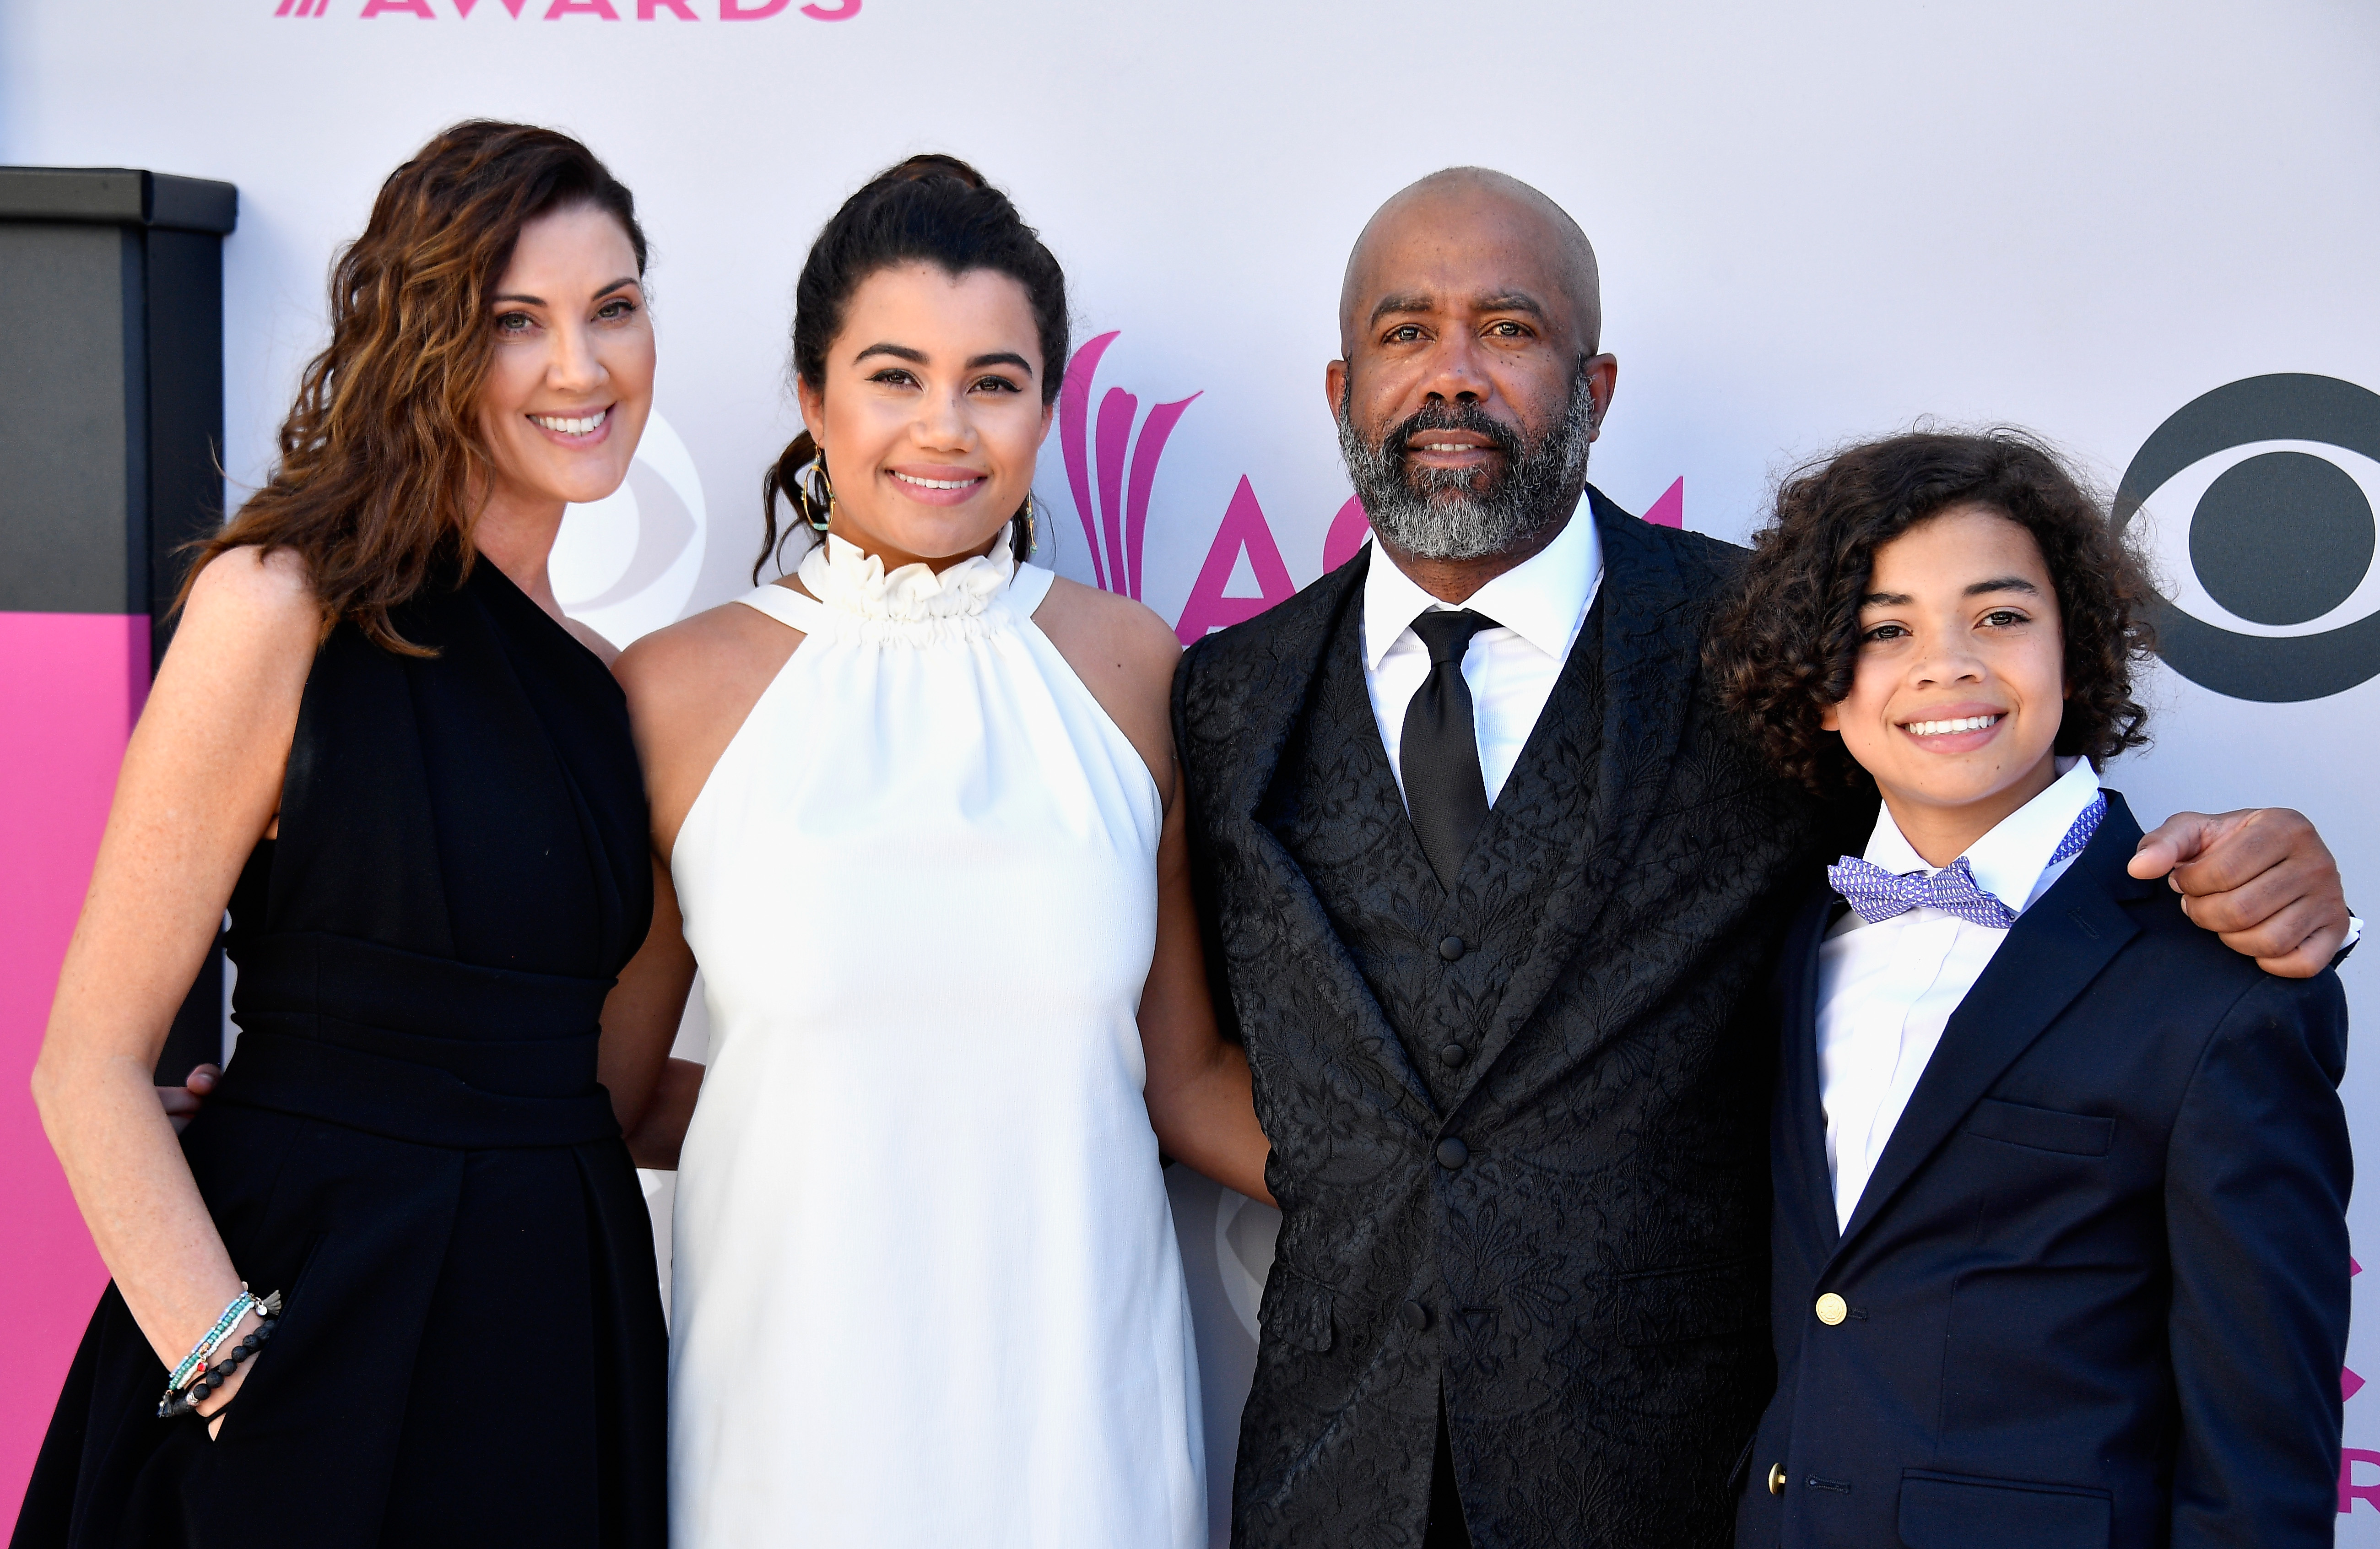 Beth Leonard, Daniella Rose Rucker, Darius Rucker, and Jack Rucker at the 52nd Academy of Country Music Awards on April 2, 2017, in Las Vegas, Nevada. | Source: Getty Images